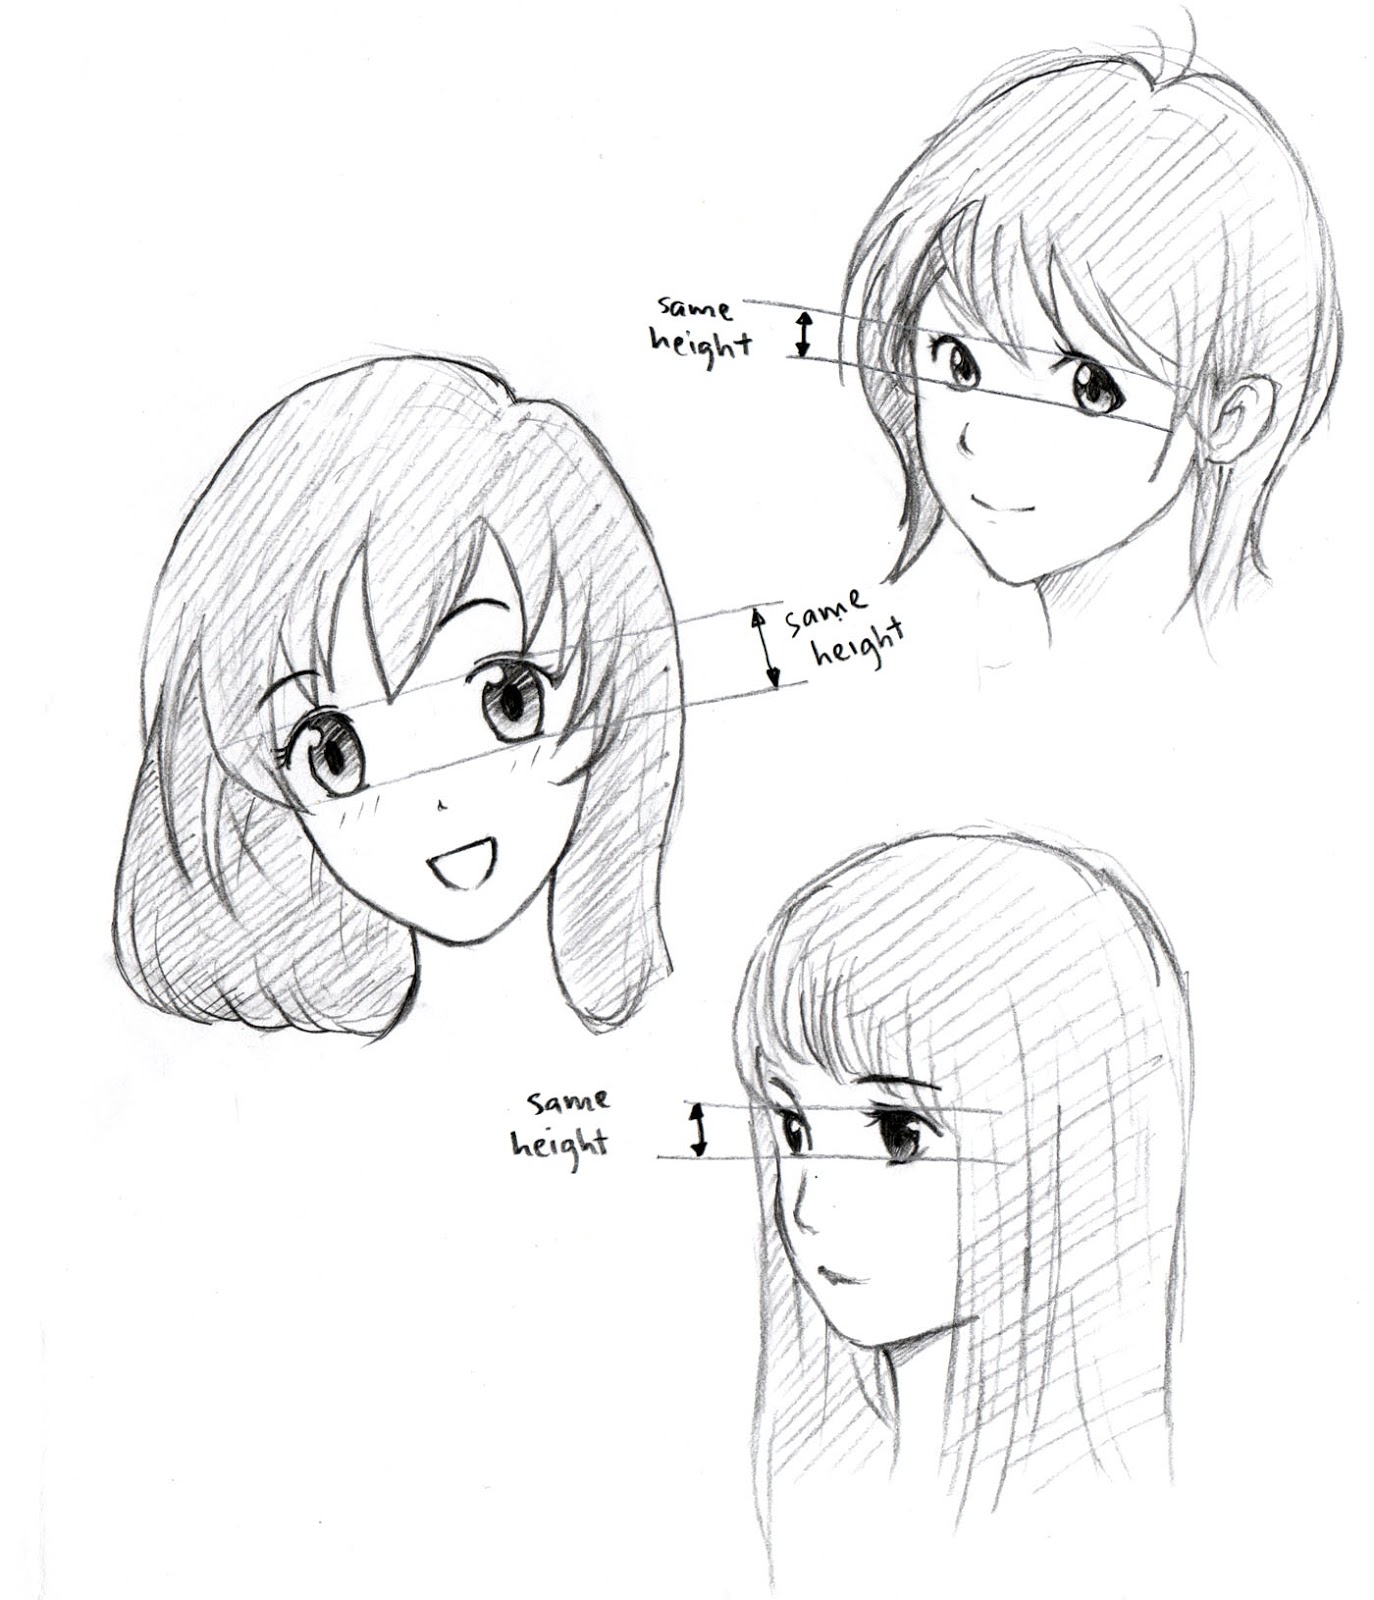 Side Profile Anime Eye - How to Draw the female eye from a side profile